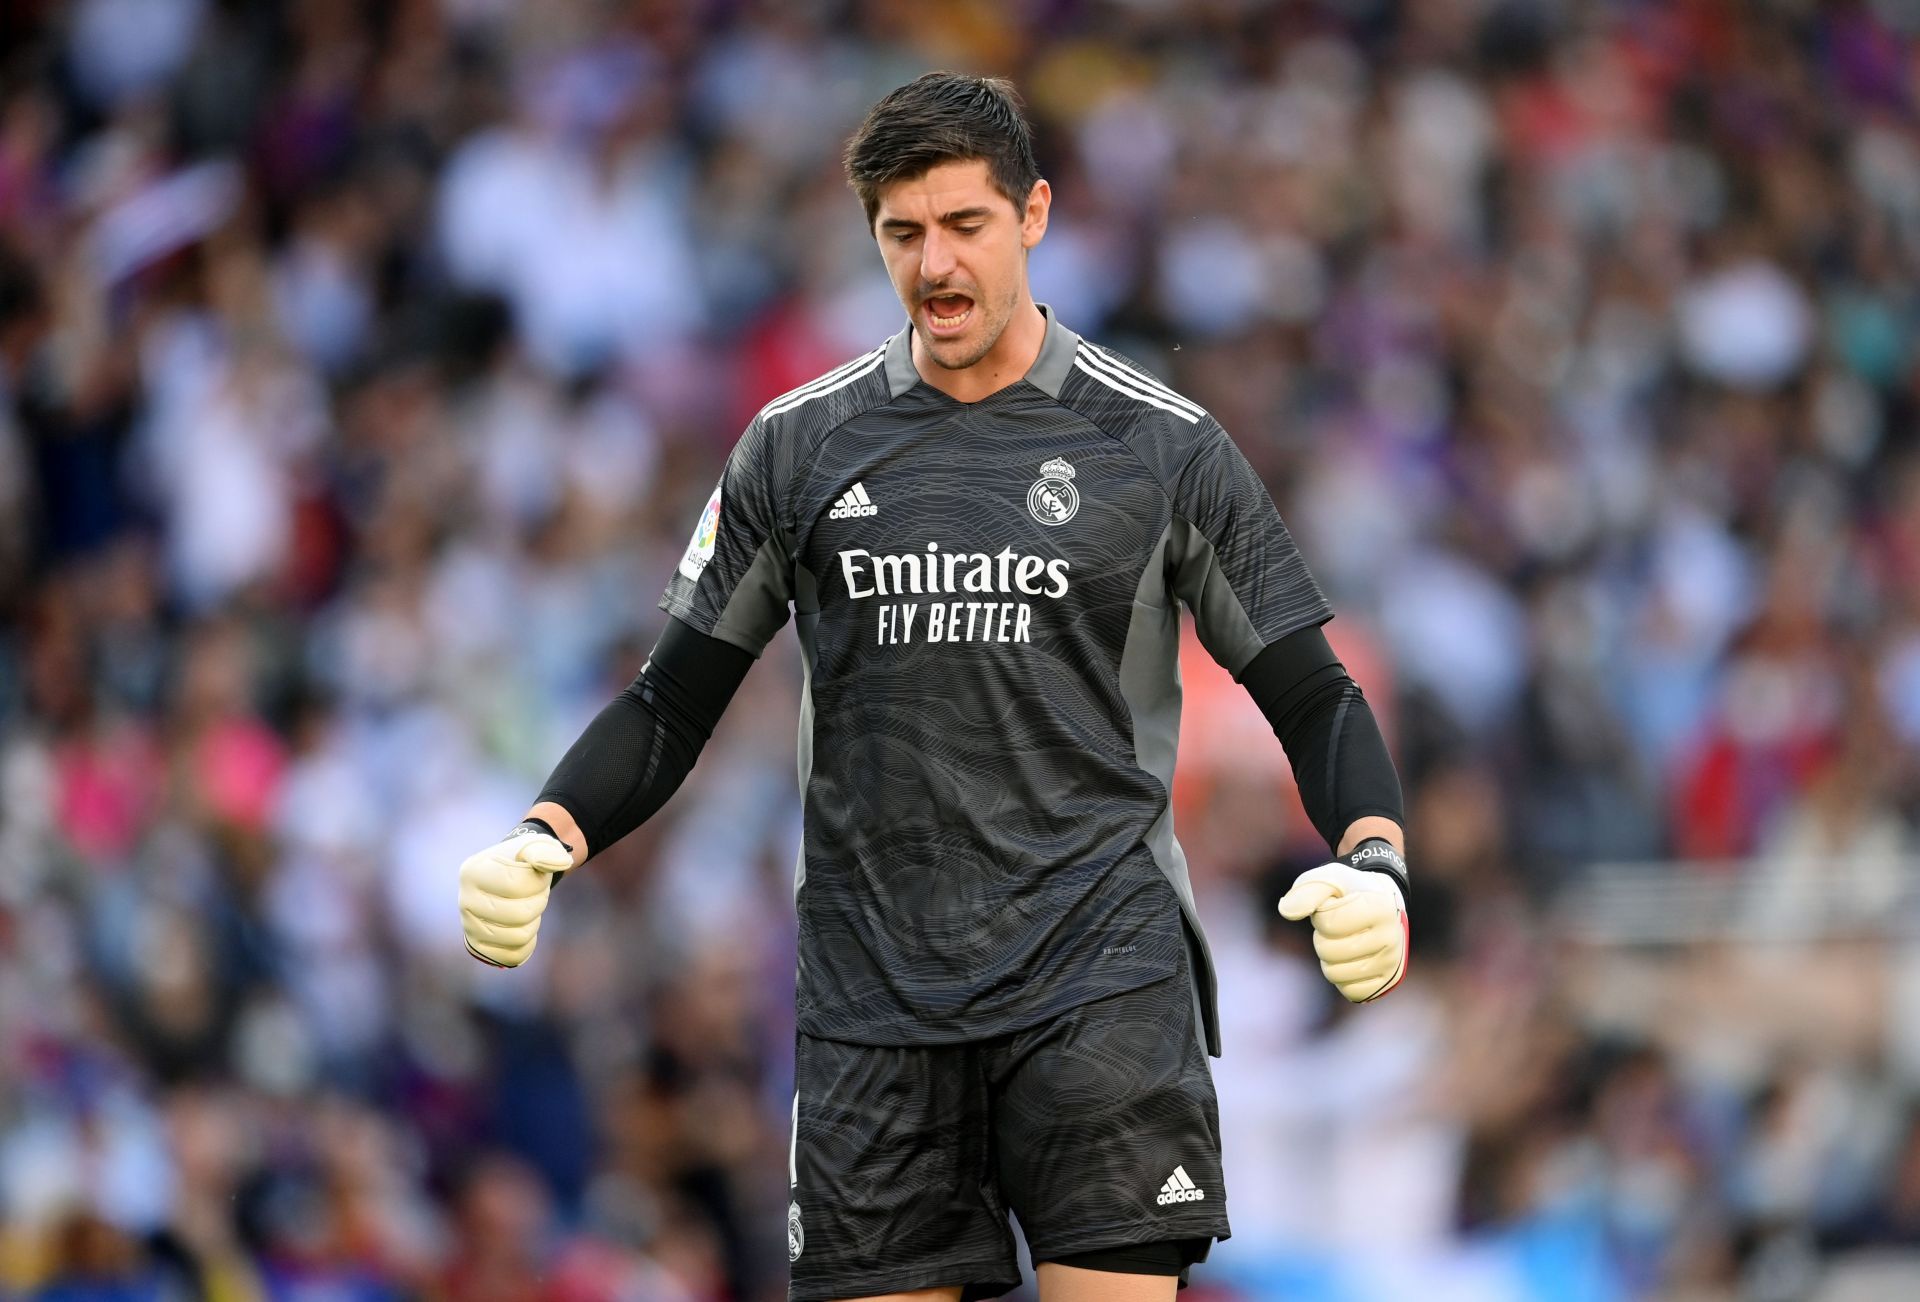 Thibaut Courtois is one of the most valuable players at Real Madrid